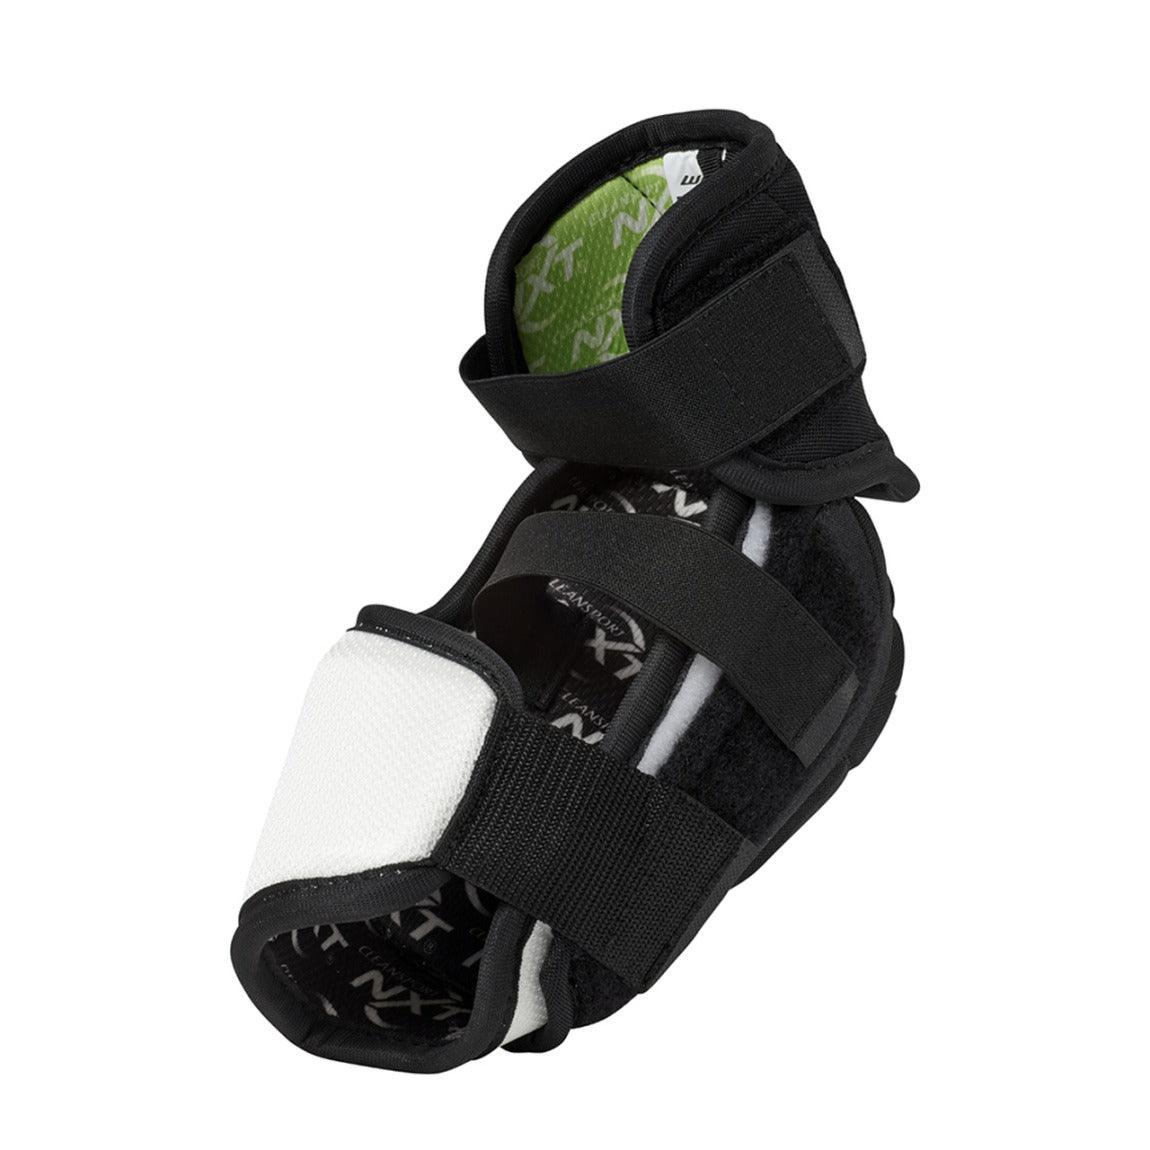 AMP700 Elbow Pad - Senior - Sports Excellence